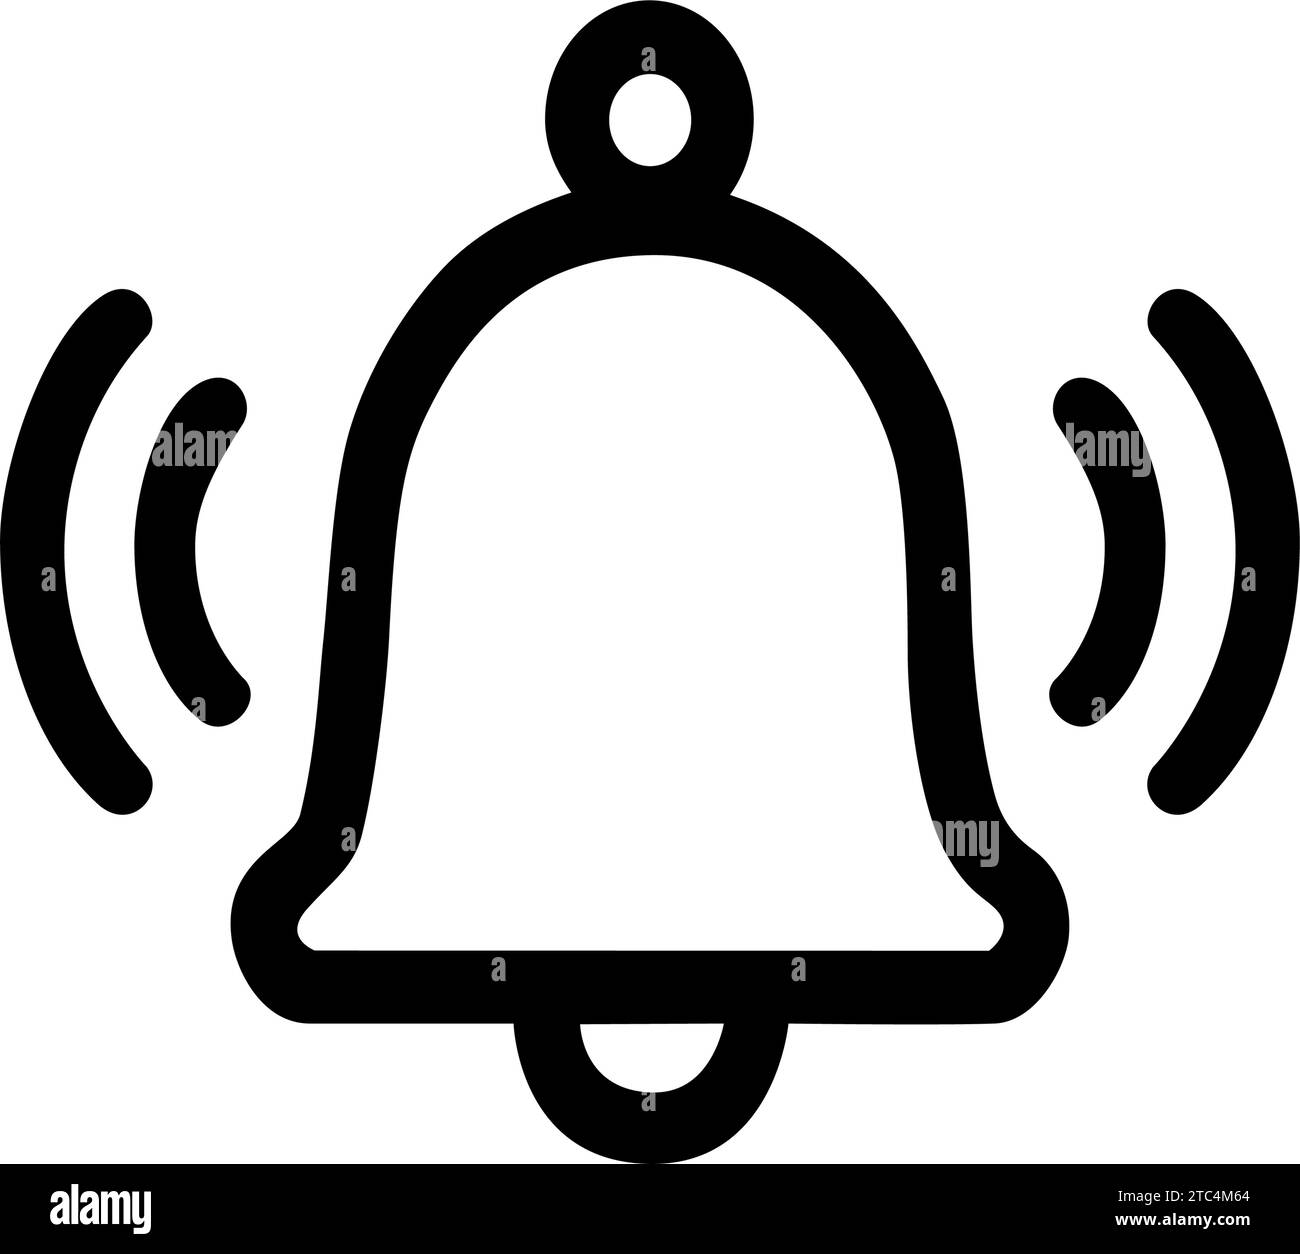 BELL ICON. PICTOGRAM NOTIFICATION BELL RINGING Stock Vector